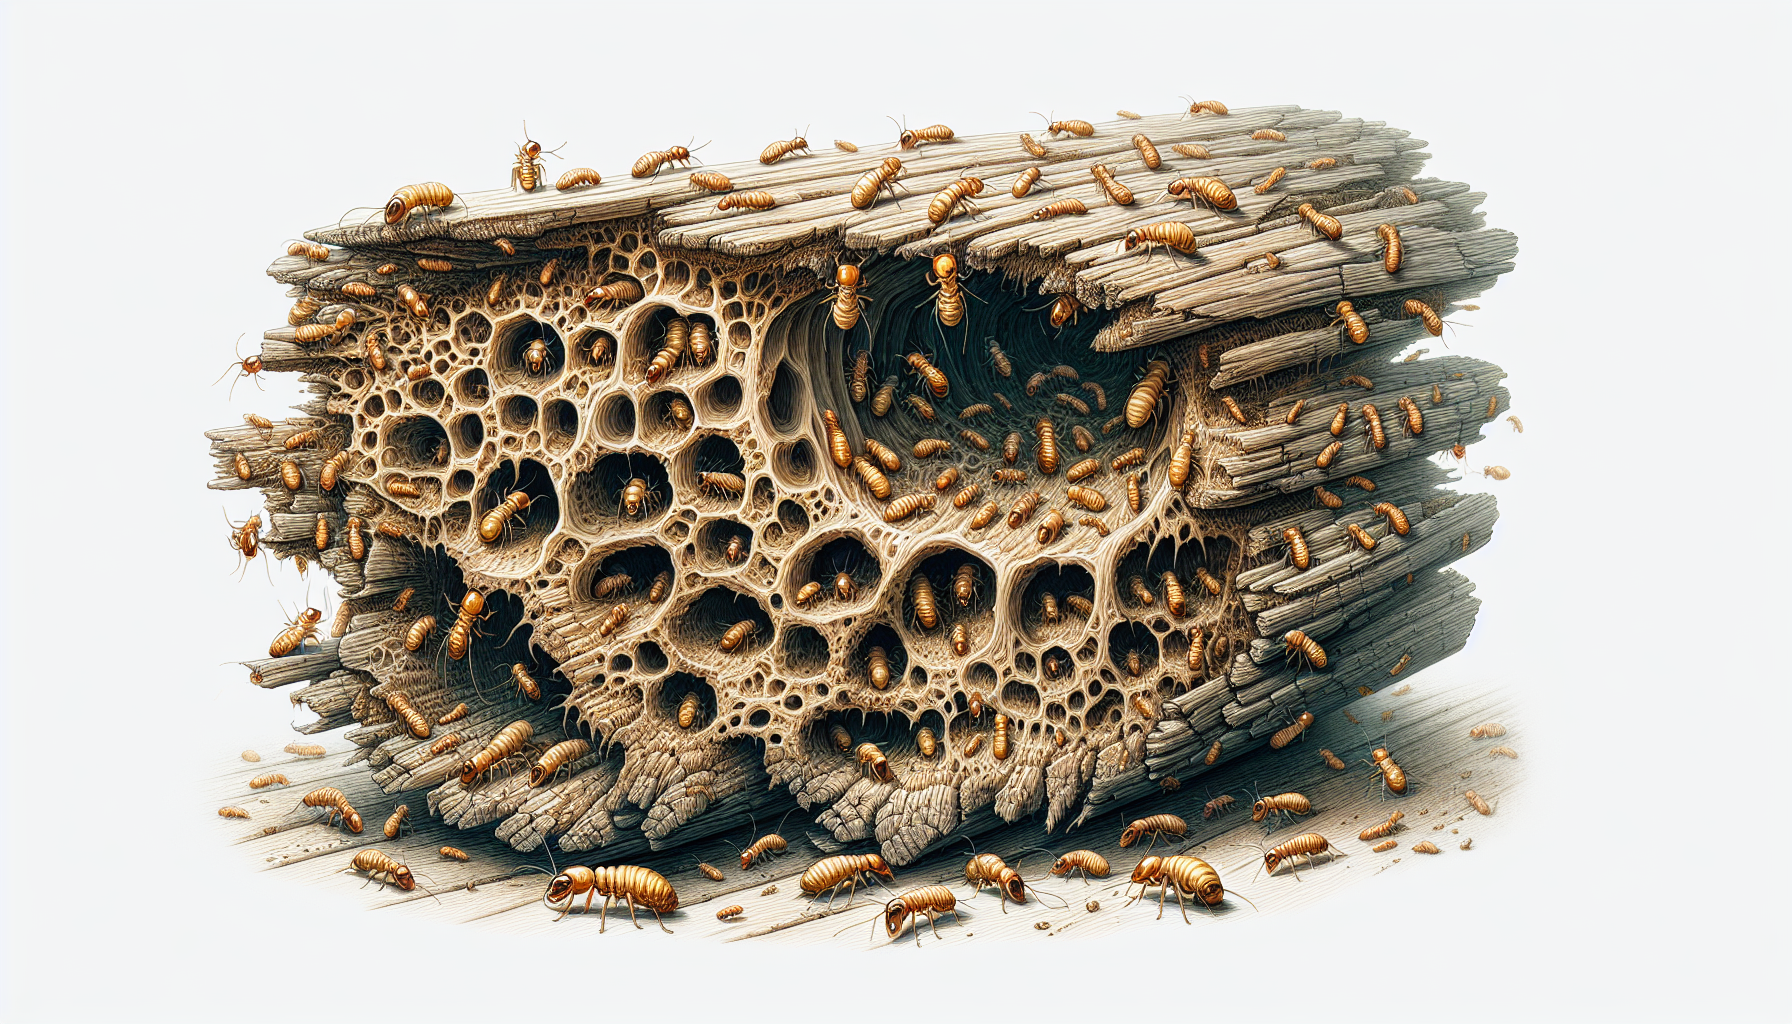 Drywood termites in a colony within exposed wood